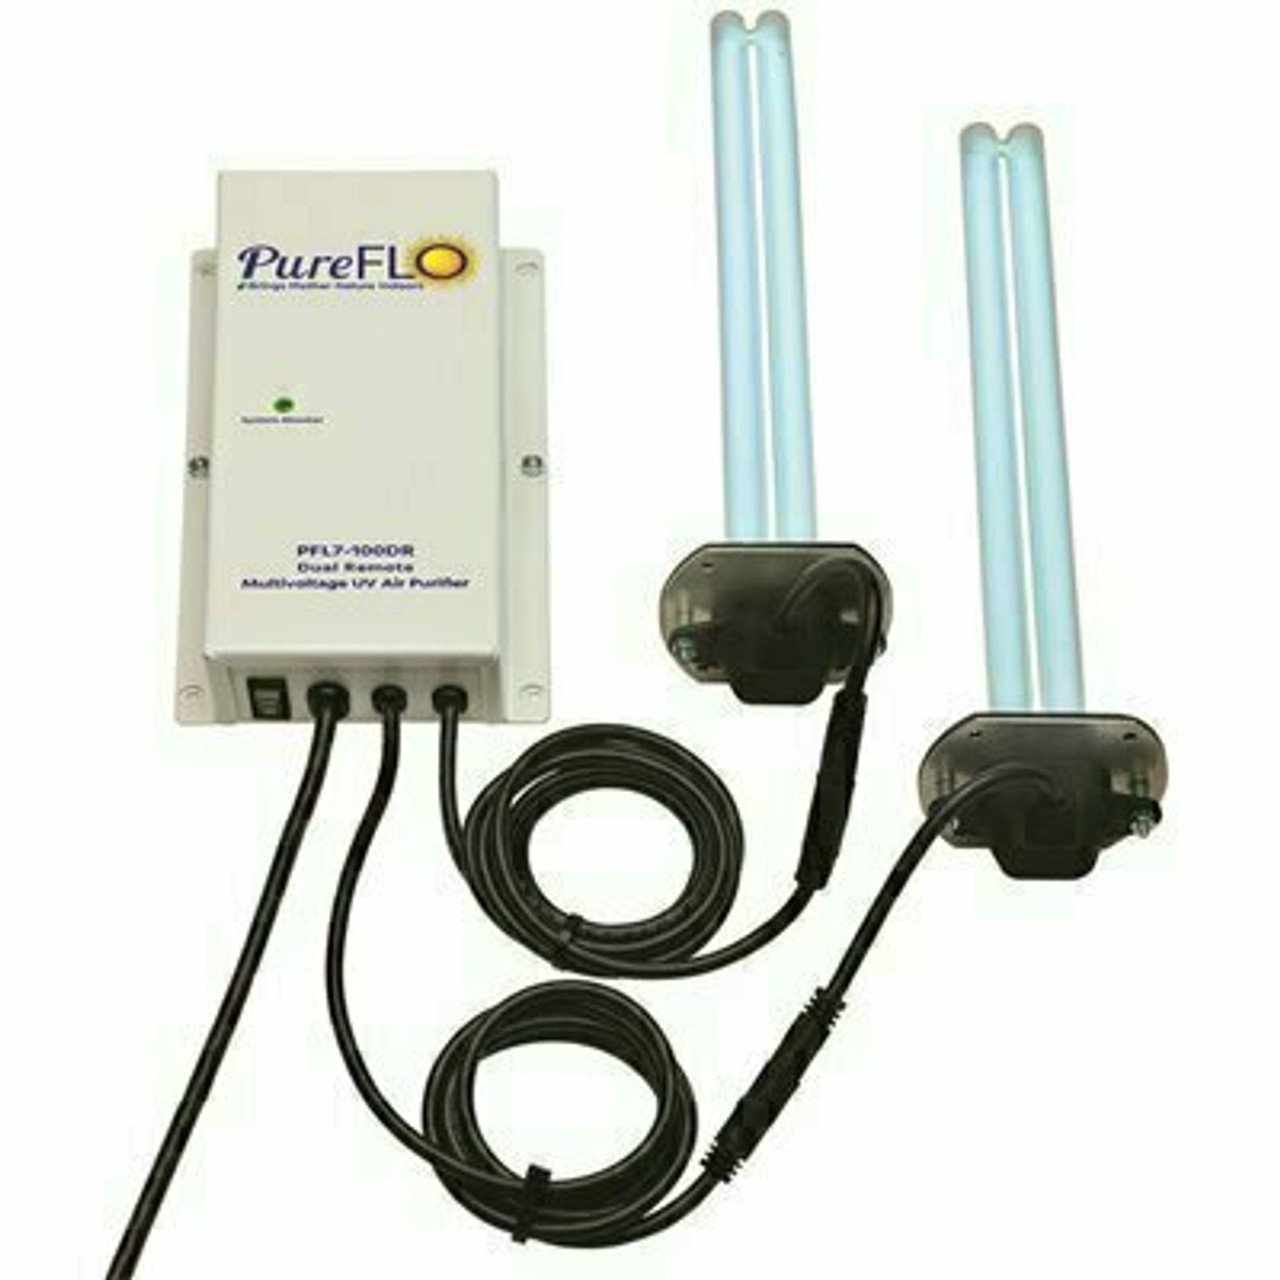 Remote Dual Lamp Unit With Two 16 In. 180 Microwatt Lamps And Two Magnetic Z-Brackets Air Purifier